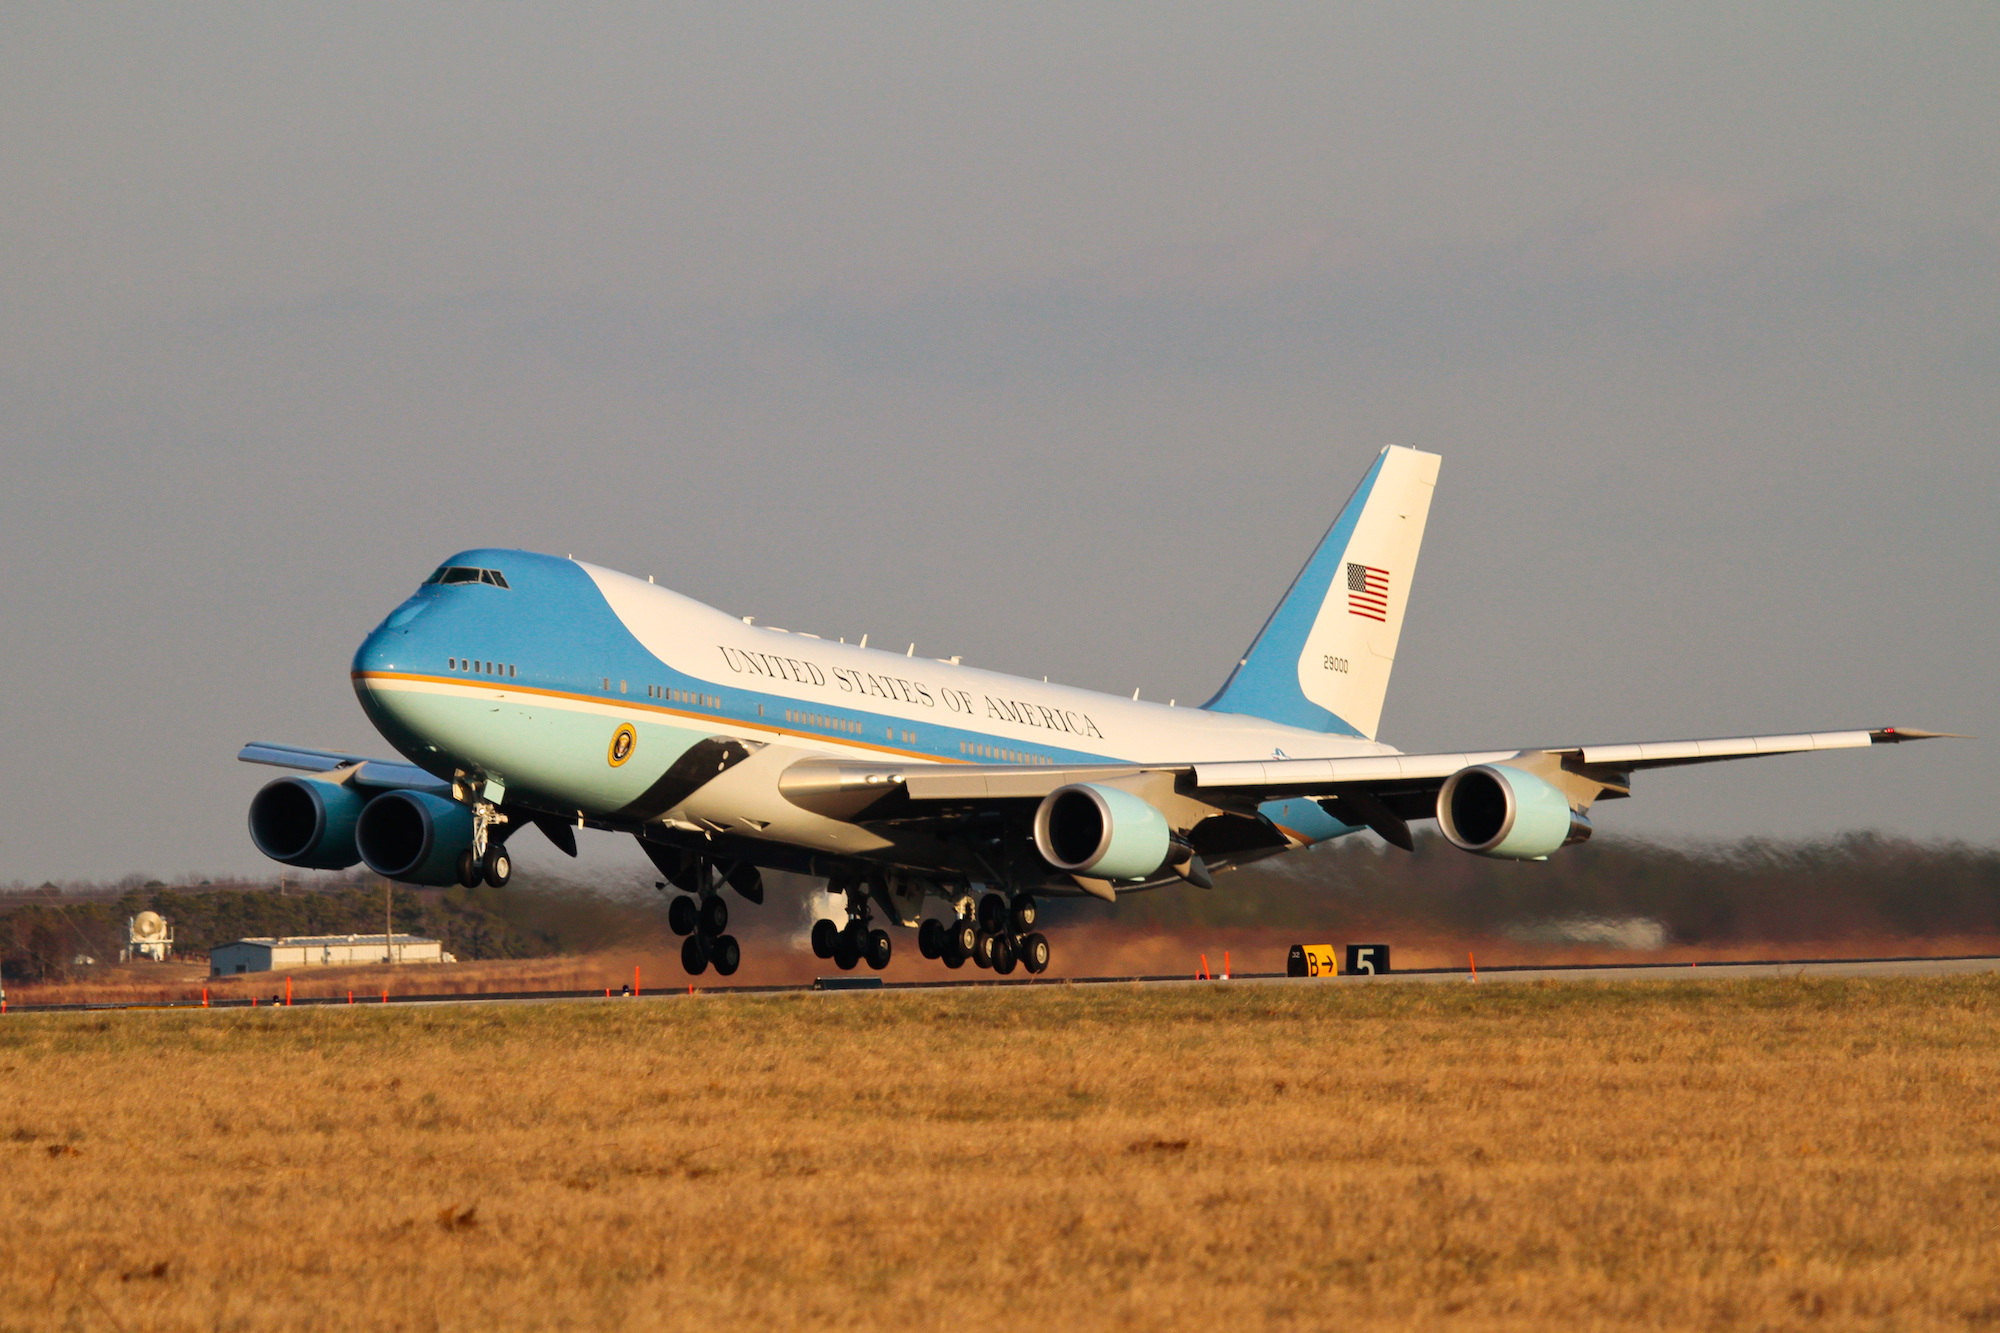 The new Air Force One arrives in 2024. Here's what we know so far.